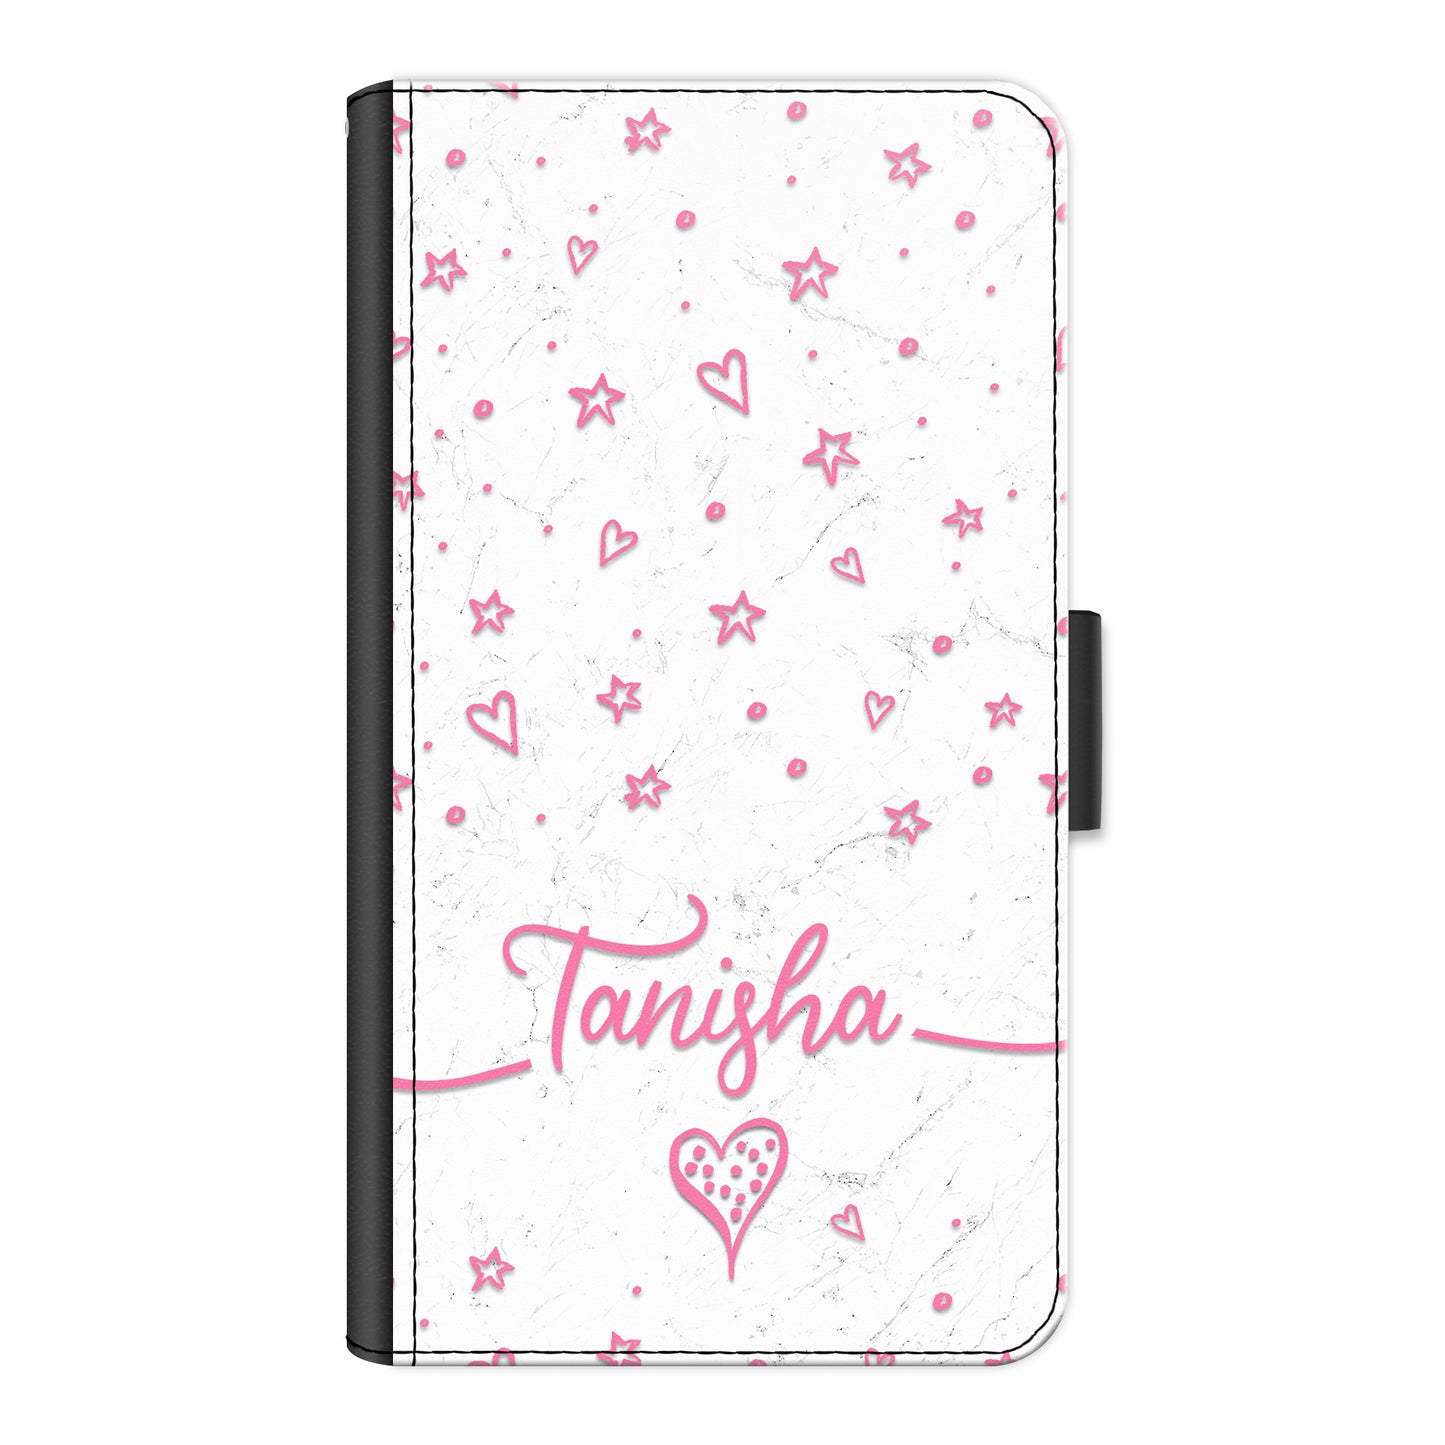 Personalised Nokia Phone Leather Wallet with Pink Stylish text, Stars and Hearts on White Marble